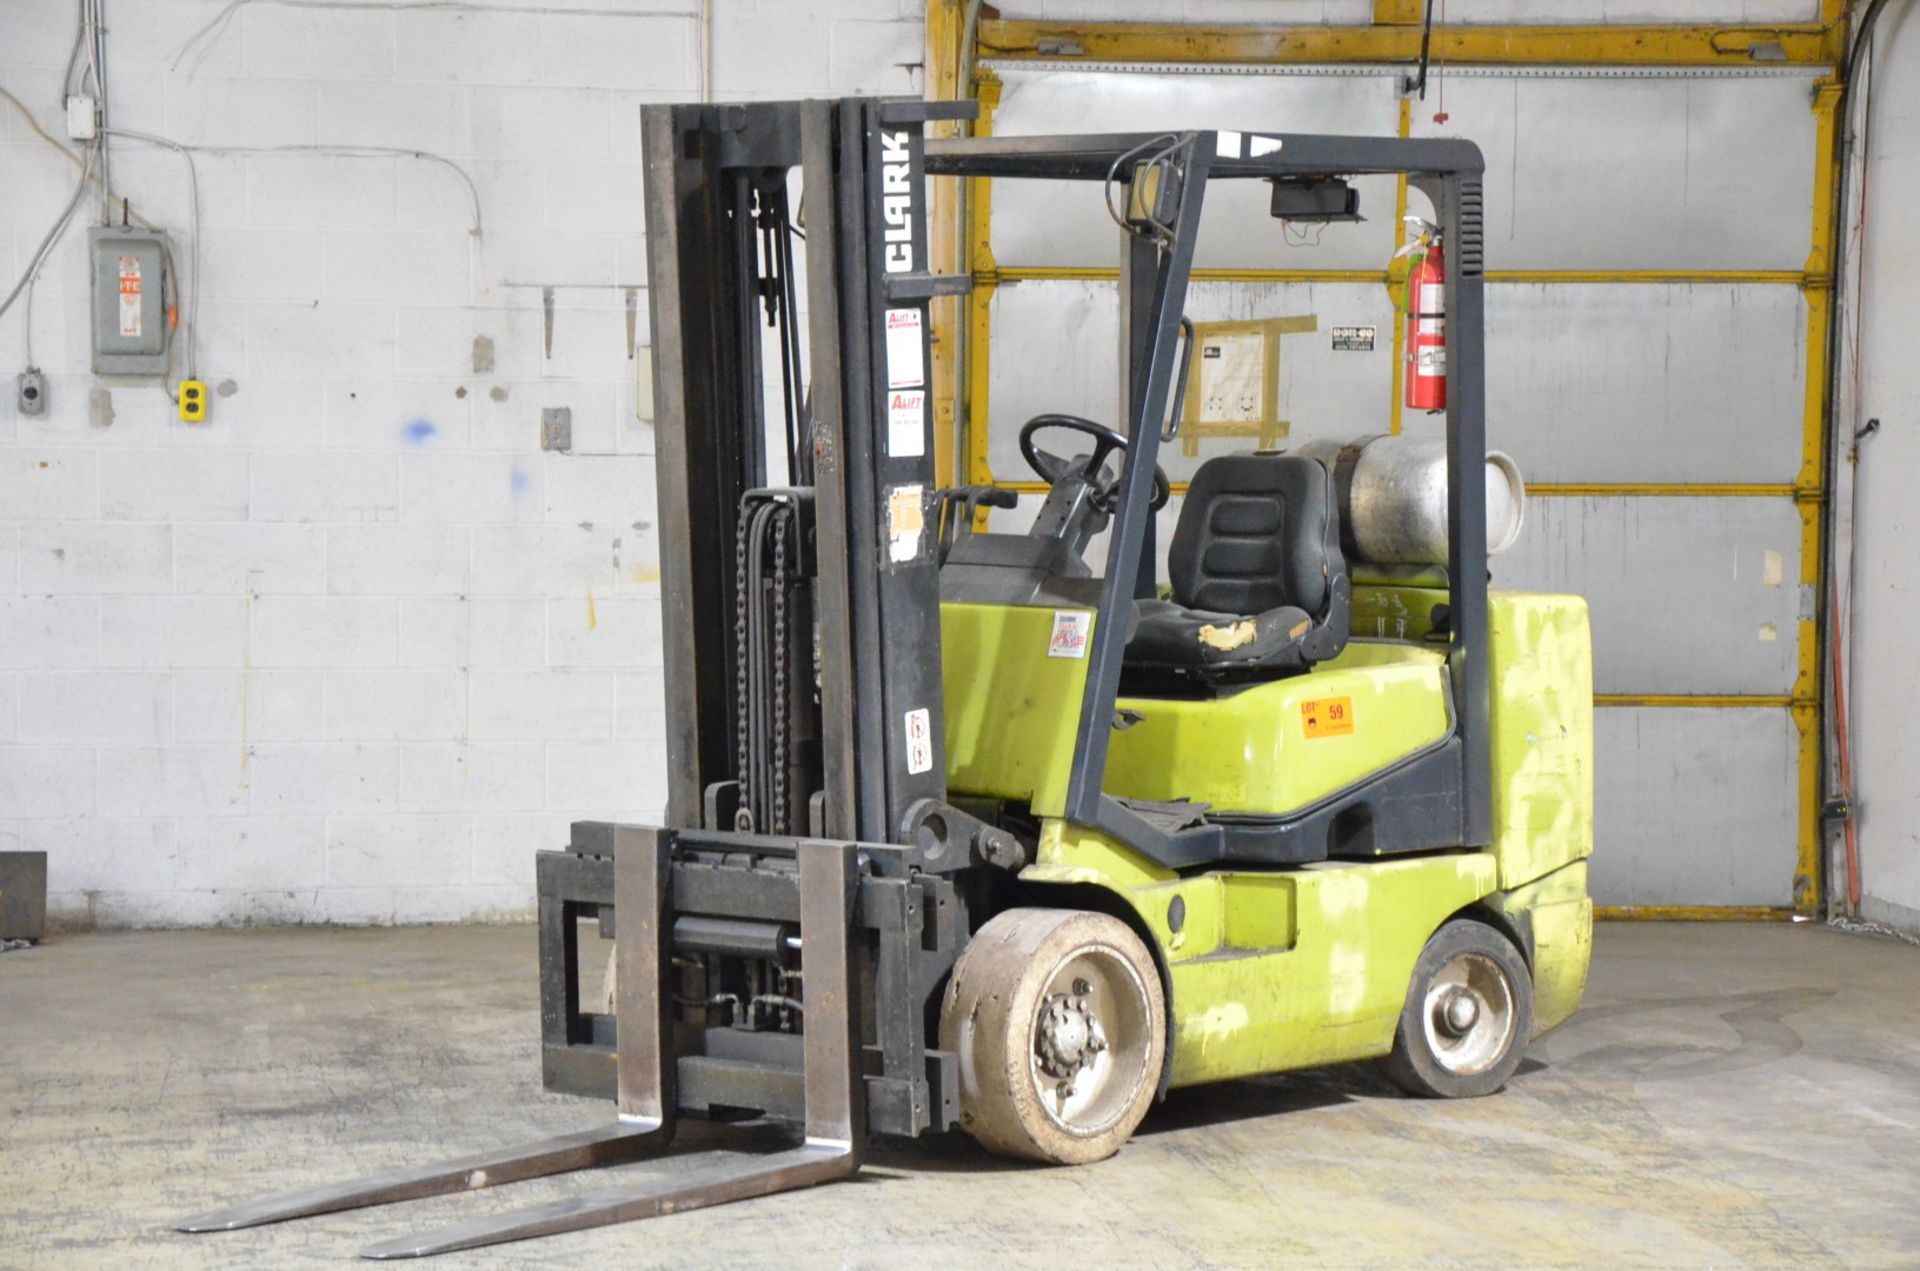 CLARK CGC32 5,900 LB. CAPACITY LPG FORKLIFT WITH 189" MAX. LIFT HEIGHT, 2-STAGE MAST, SIDE SHIFT,